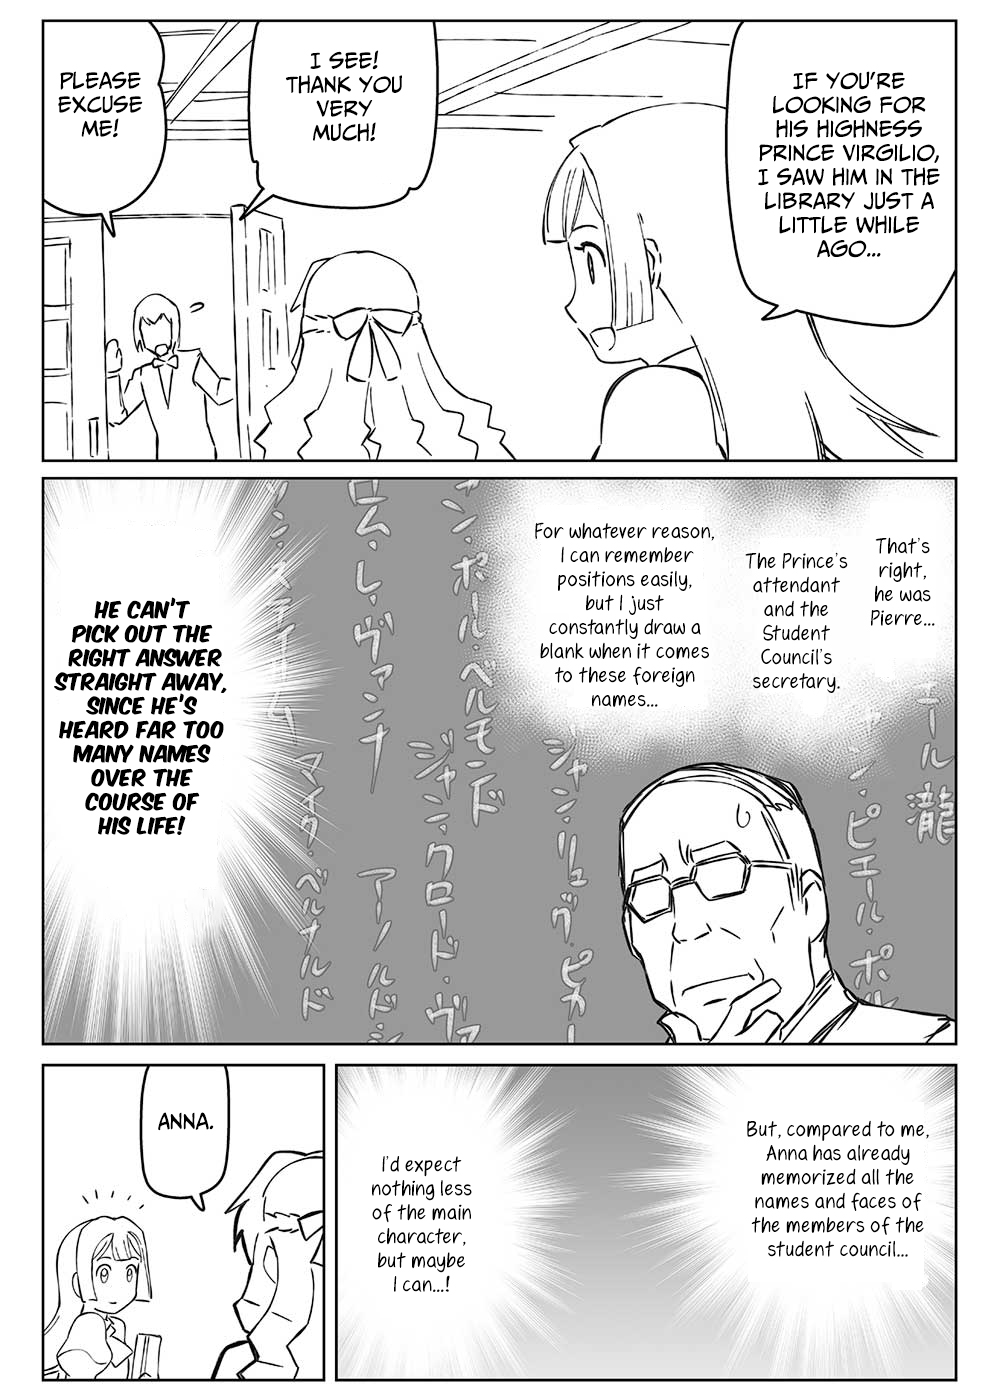 Middle-Aged Man's Noble Daughter Reincarnation - Page 2